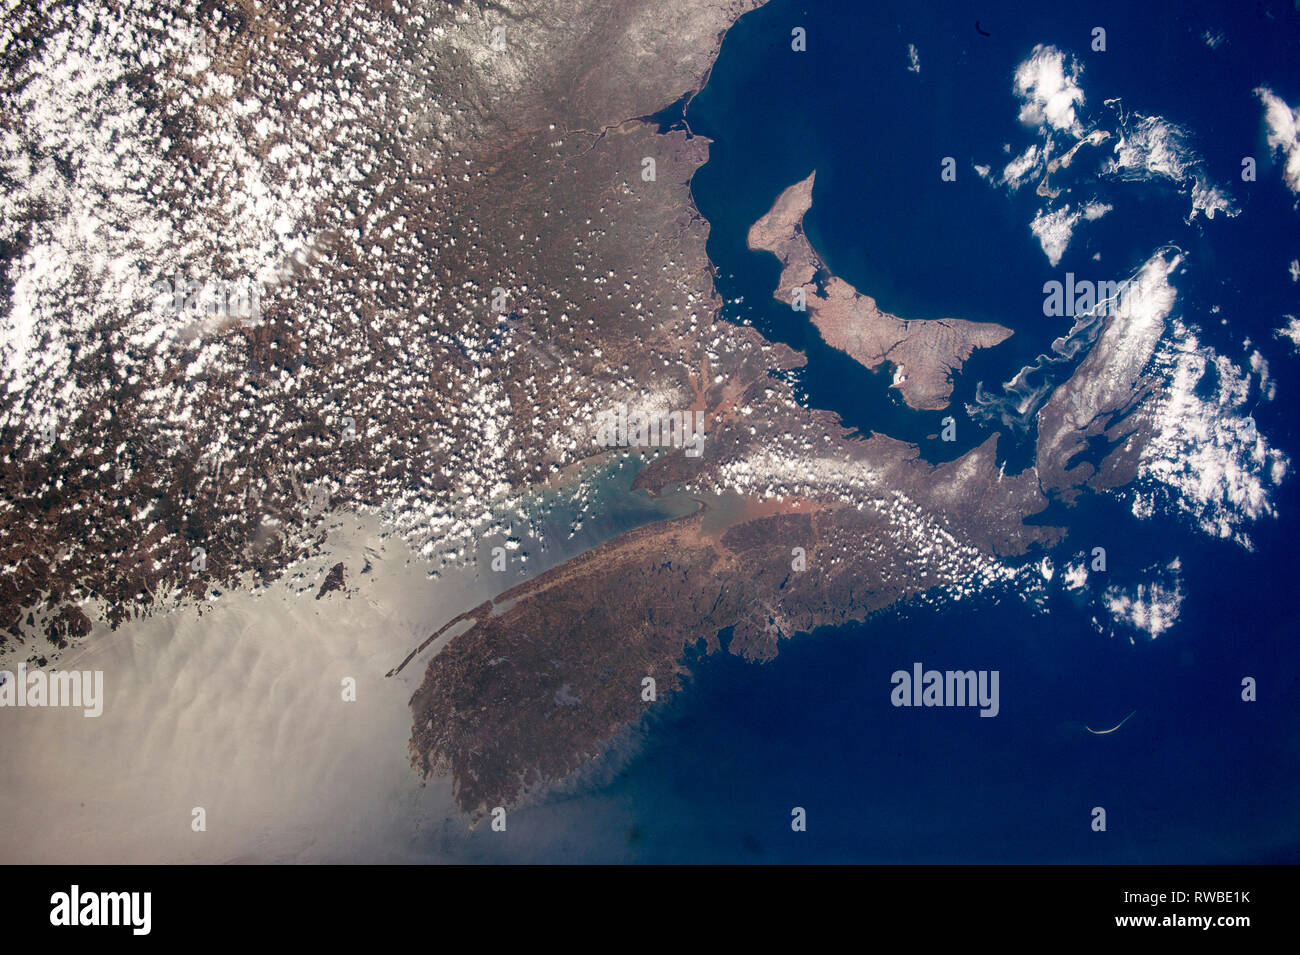 Image of Atlantic Canada taken from the International Space Station Stock Photo